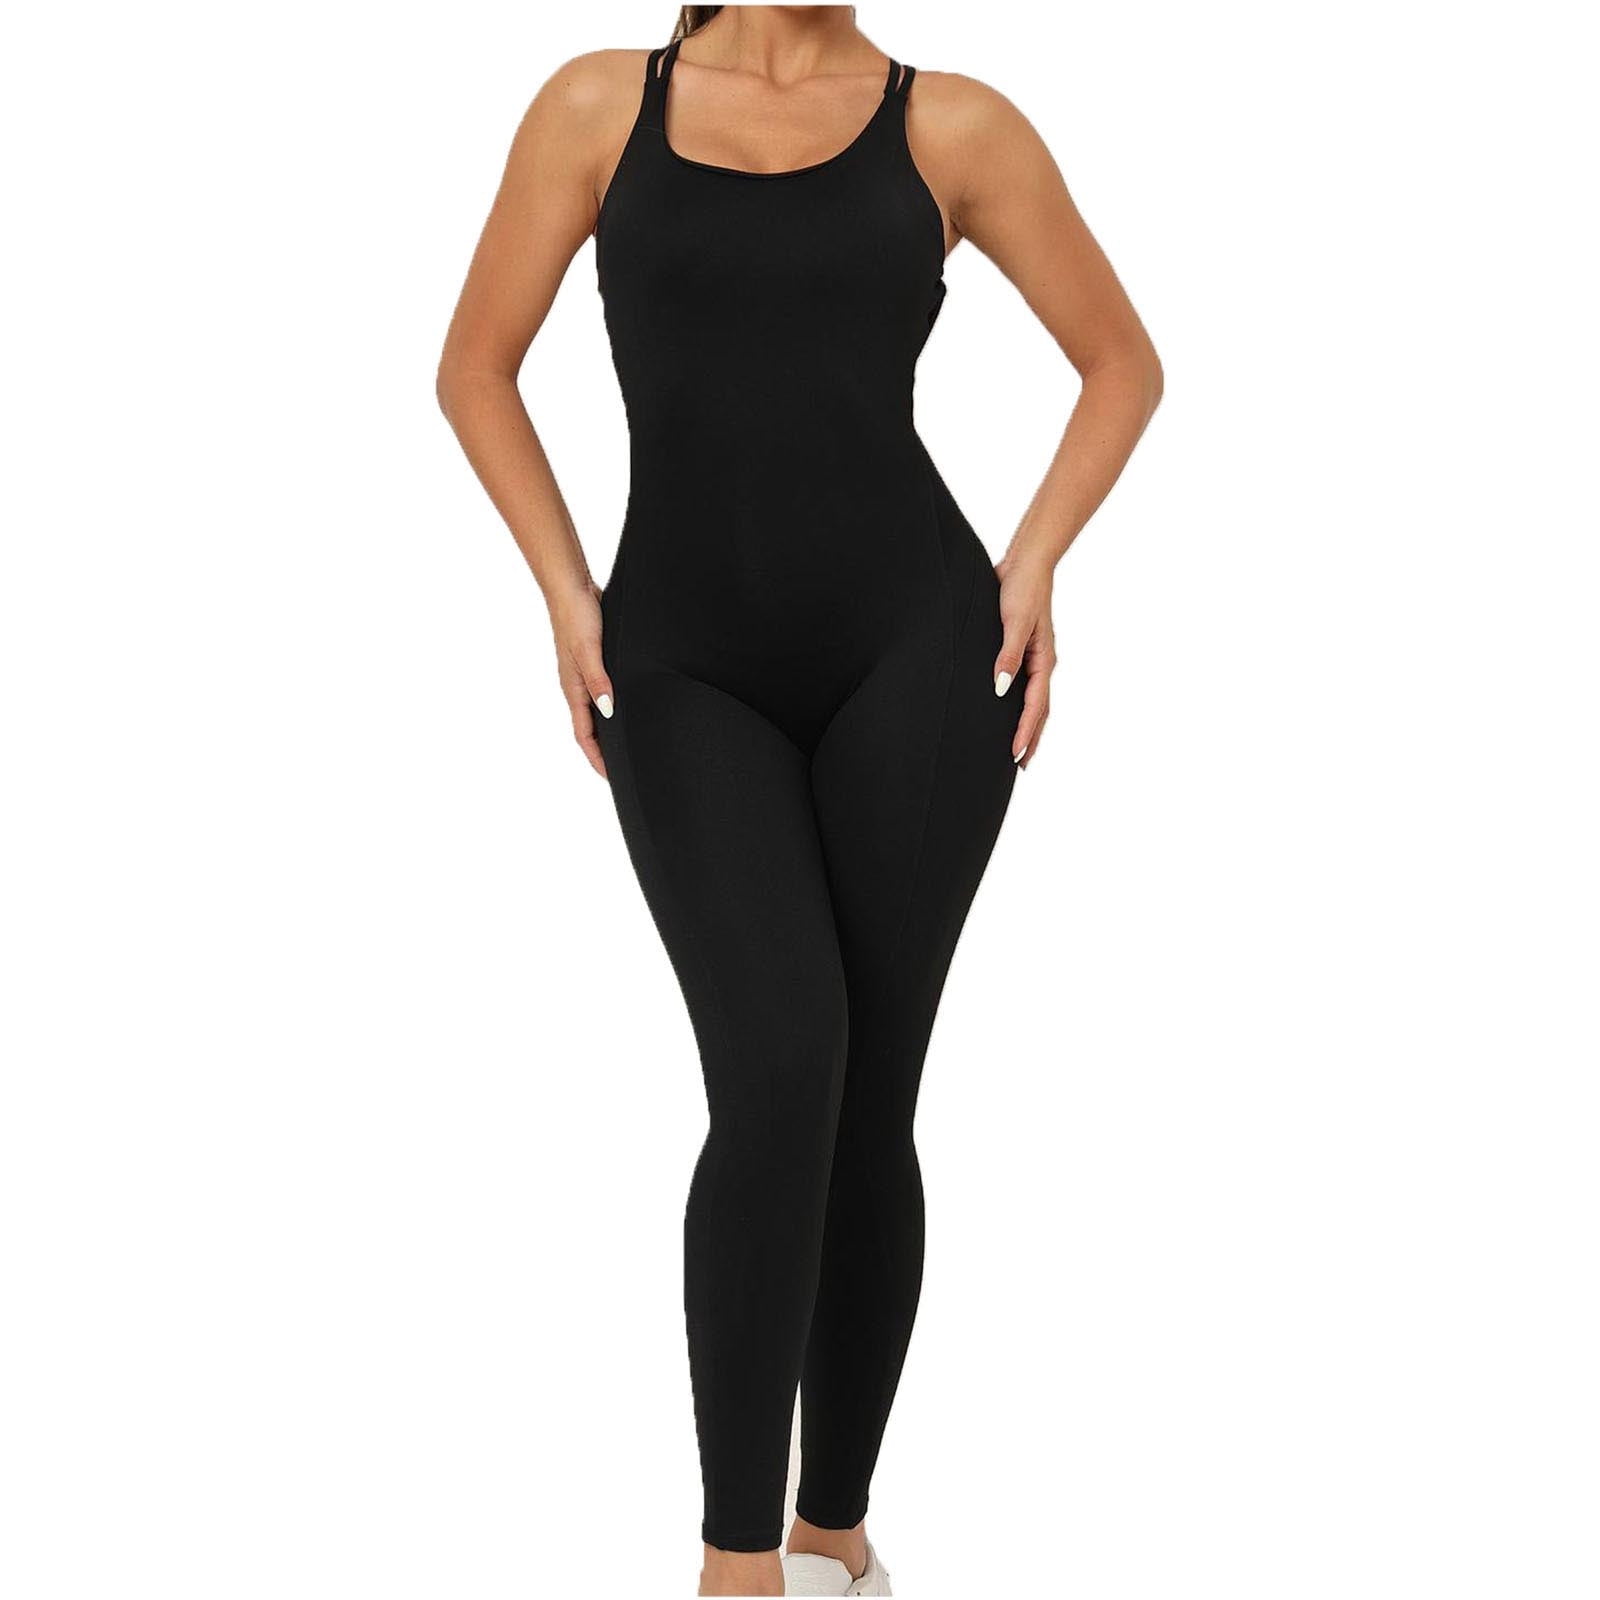 Backless Yoga T Shirts And Tight Yoga Pants For Women